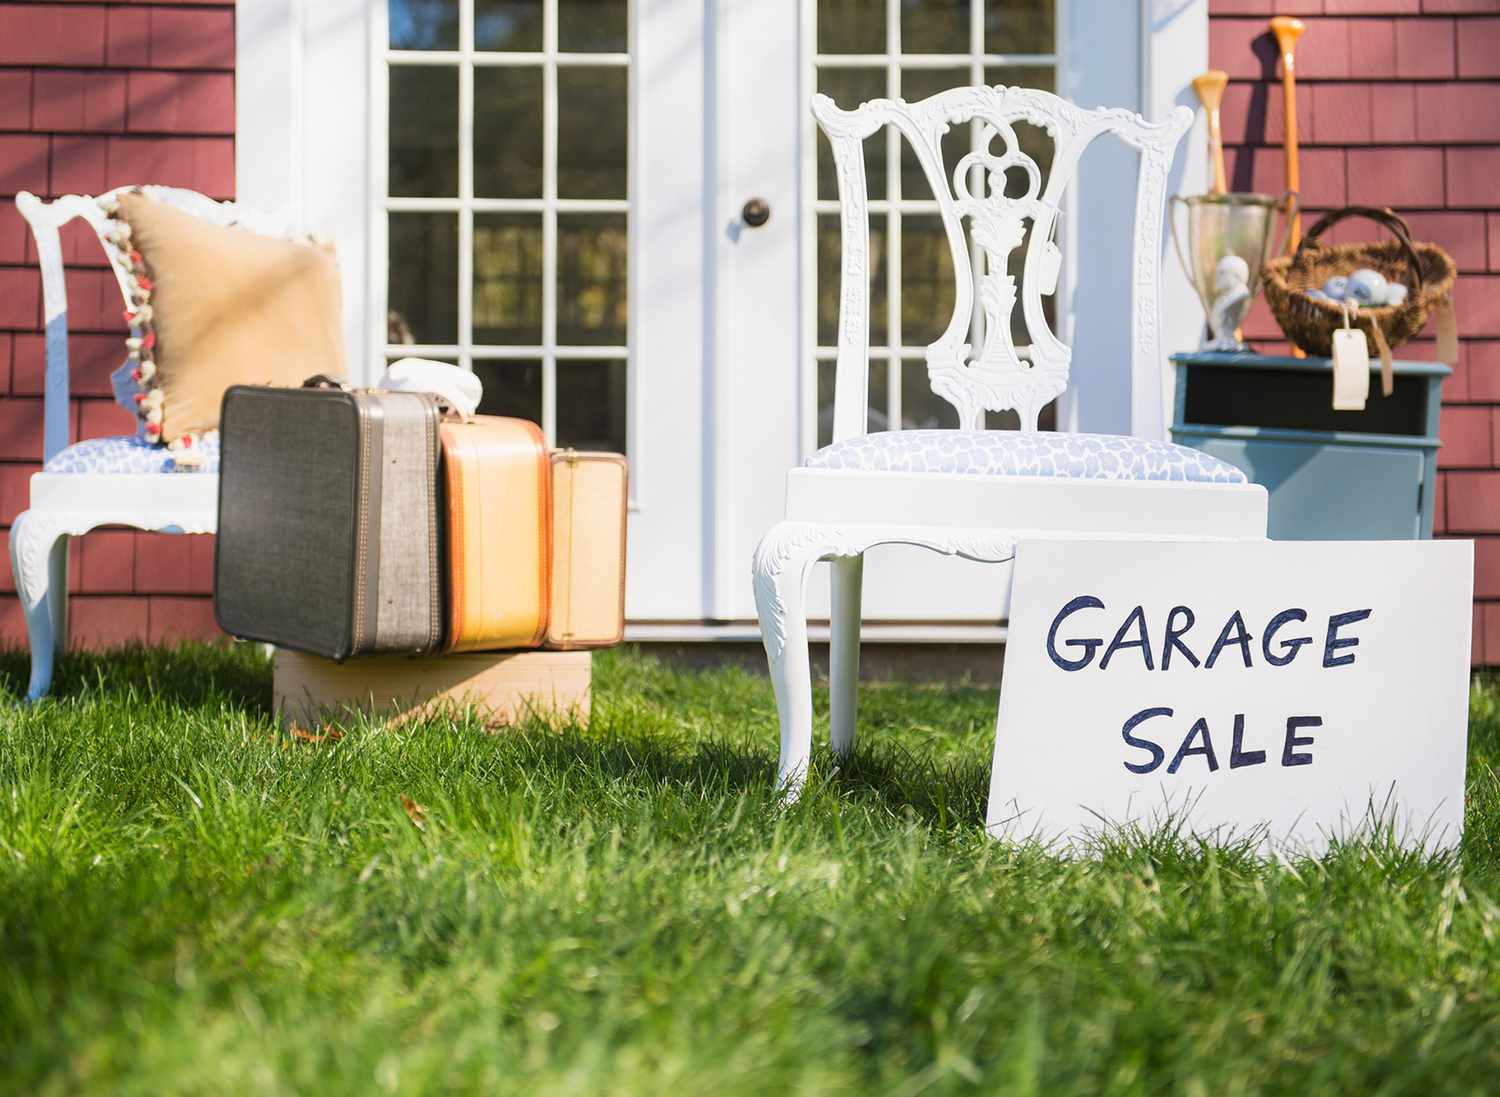 garage sale sign with items for sale on grass in front yard